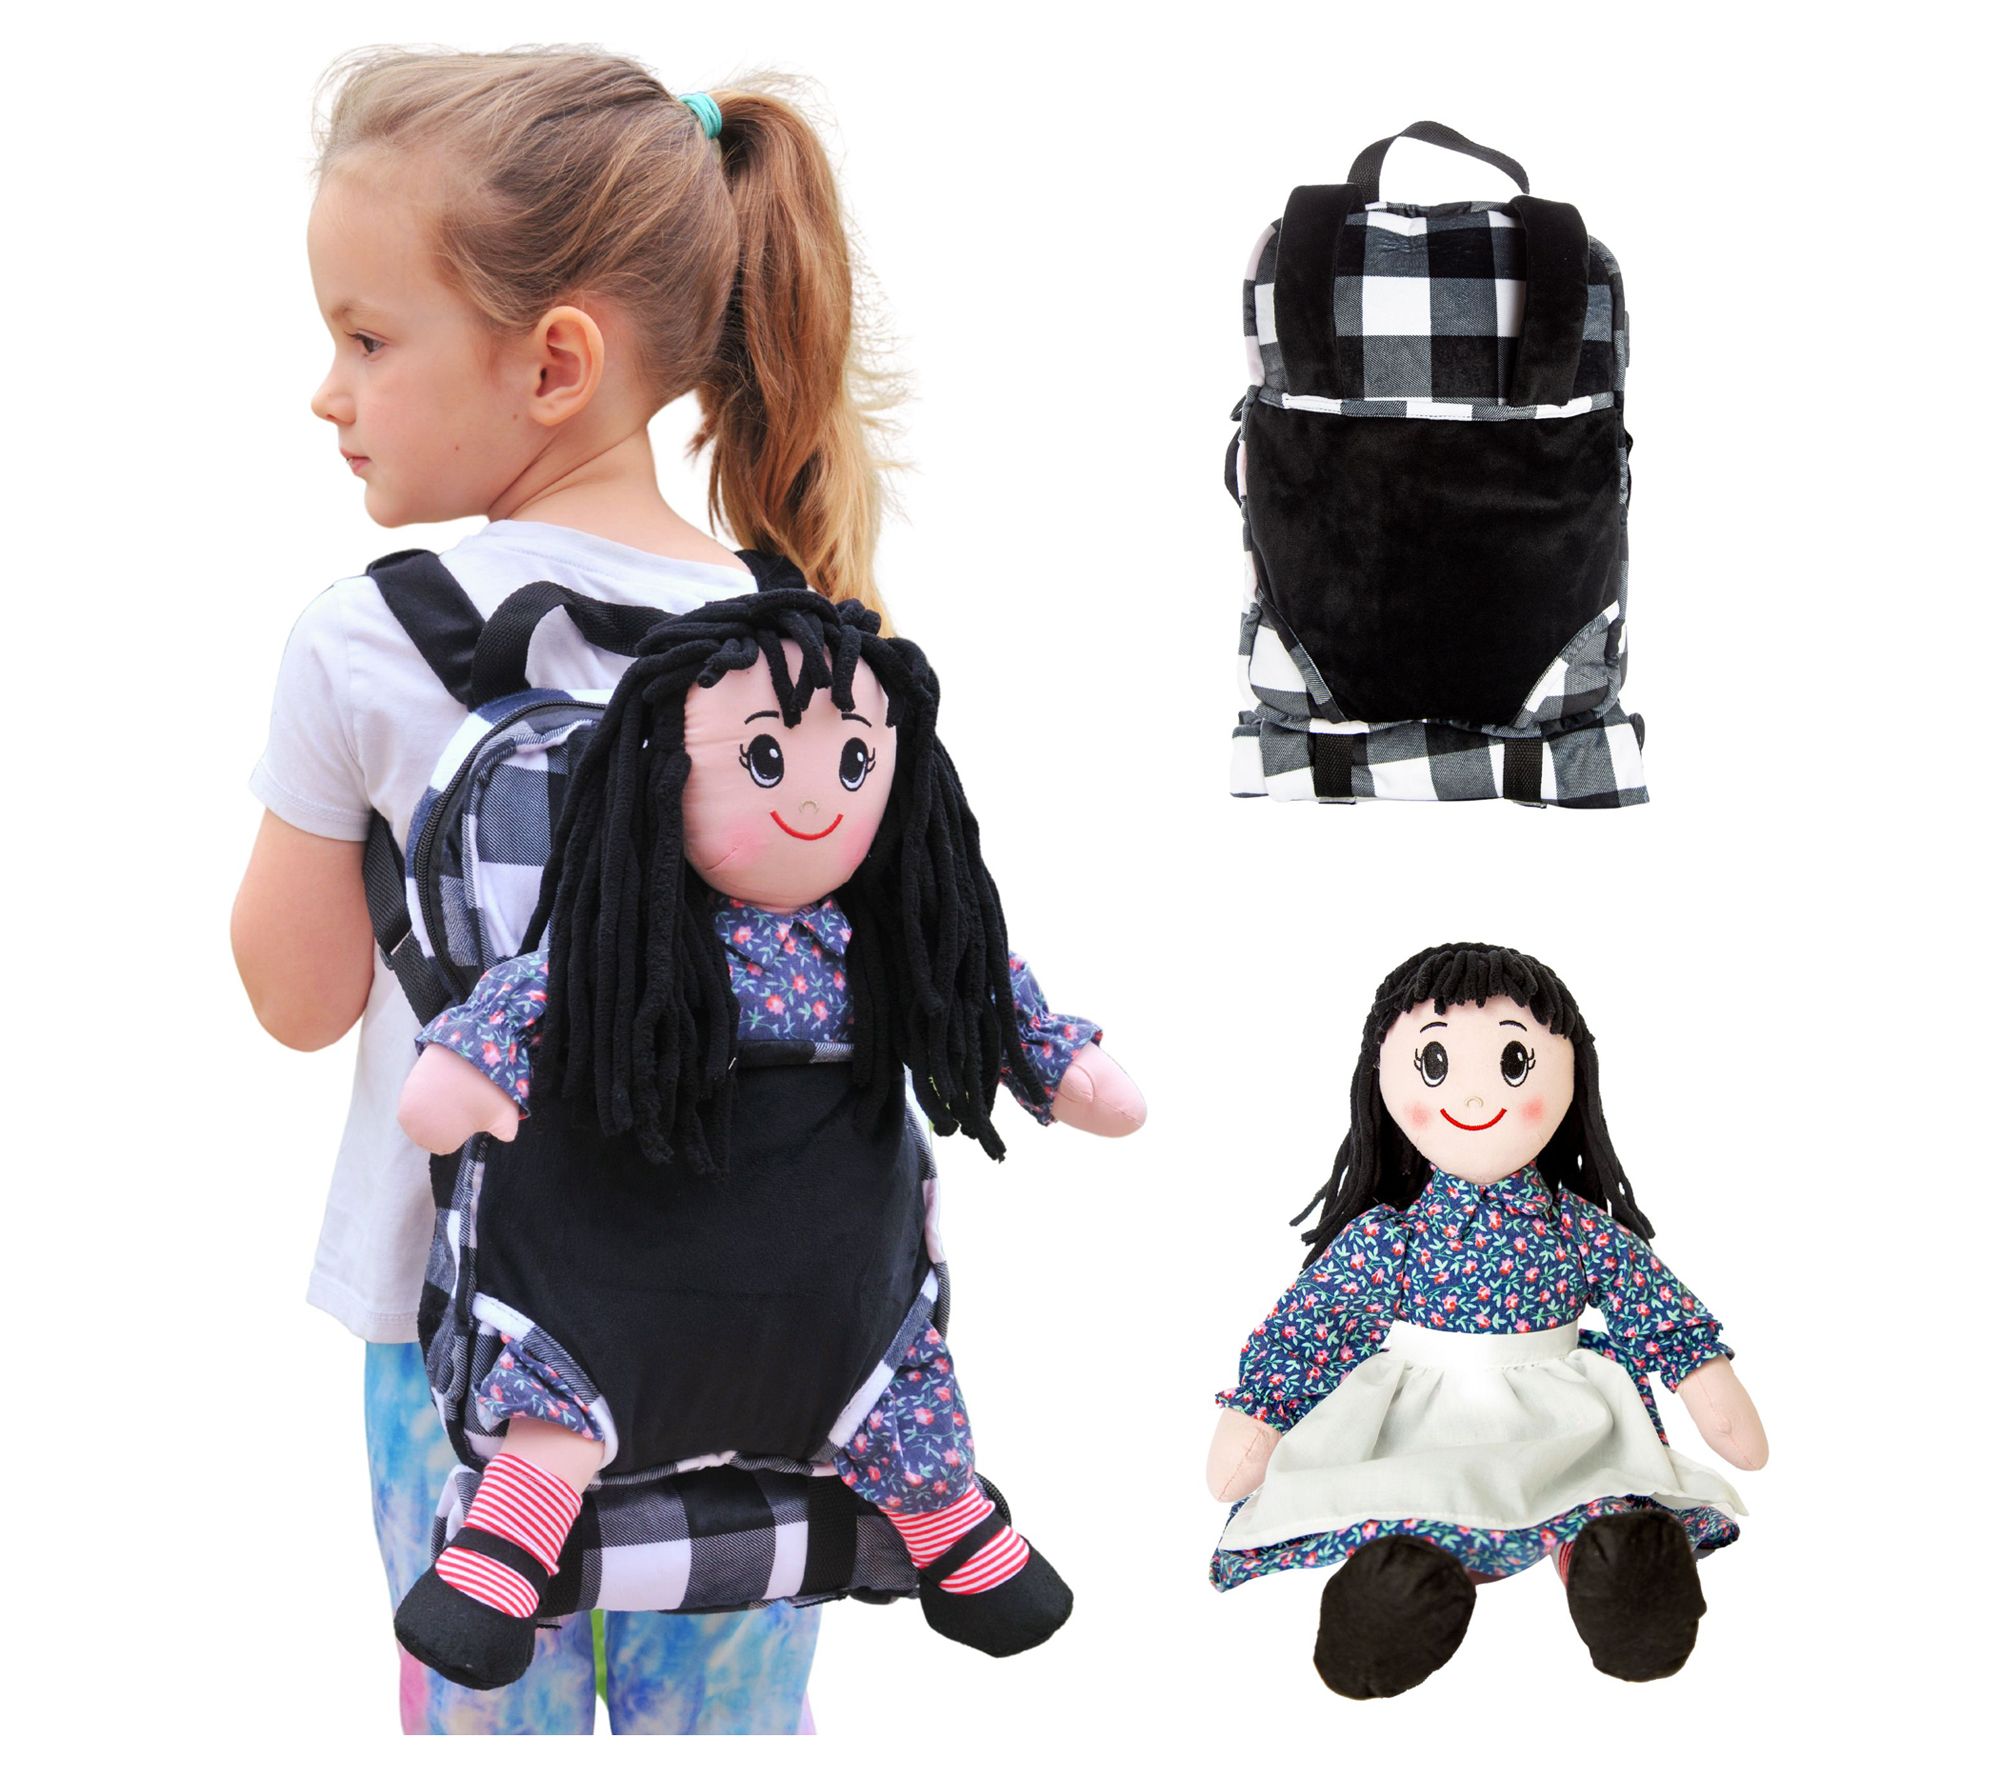 Princess Coralie: 11 Hairdressing Head - Little Emma - Theo Klein, Includes Hairstyling Accessories, Ages 3+